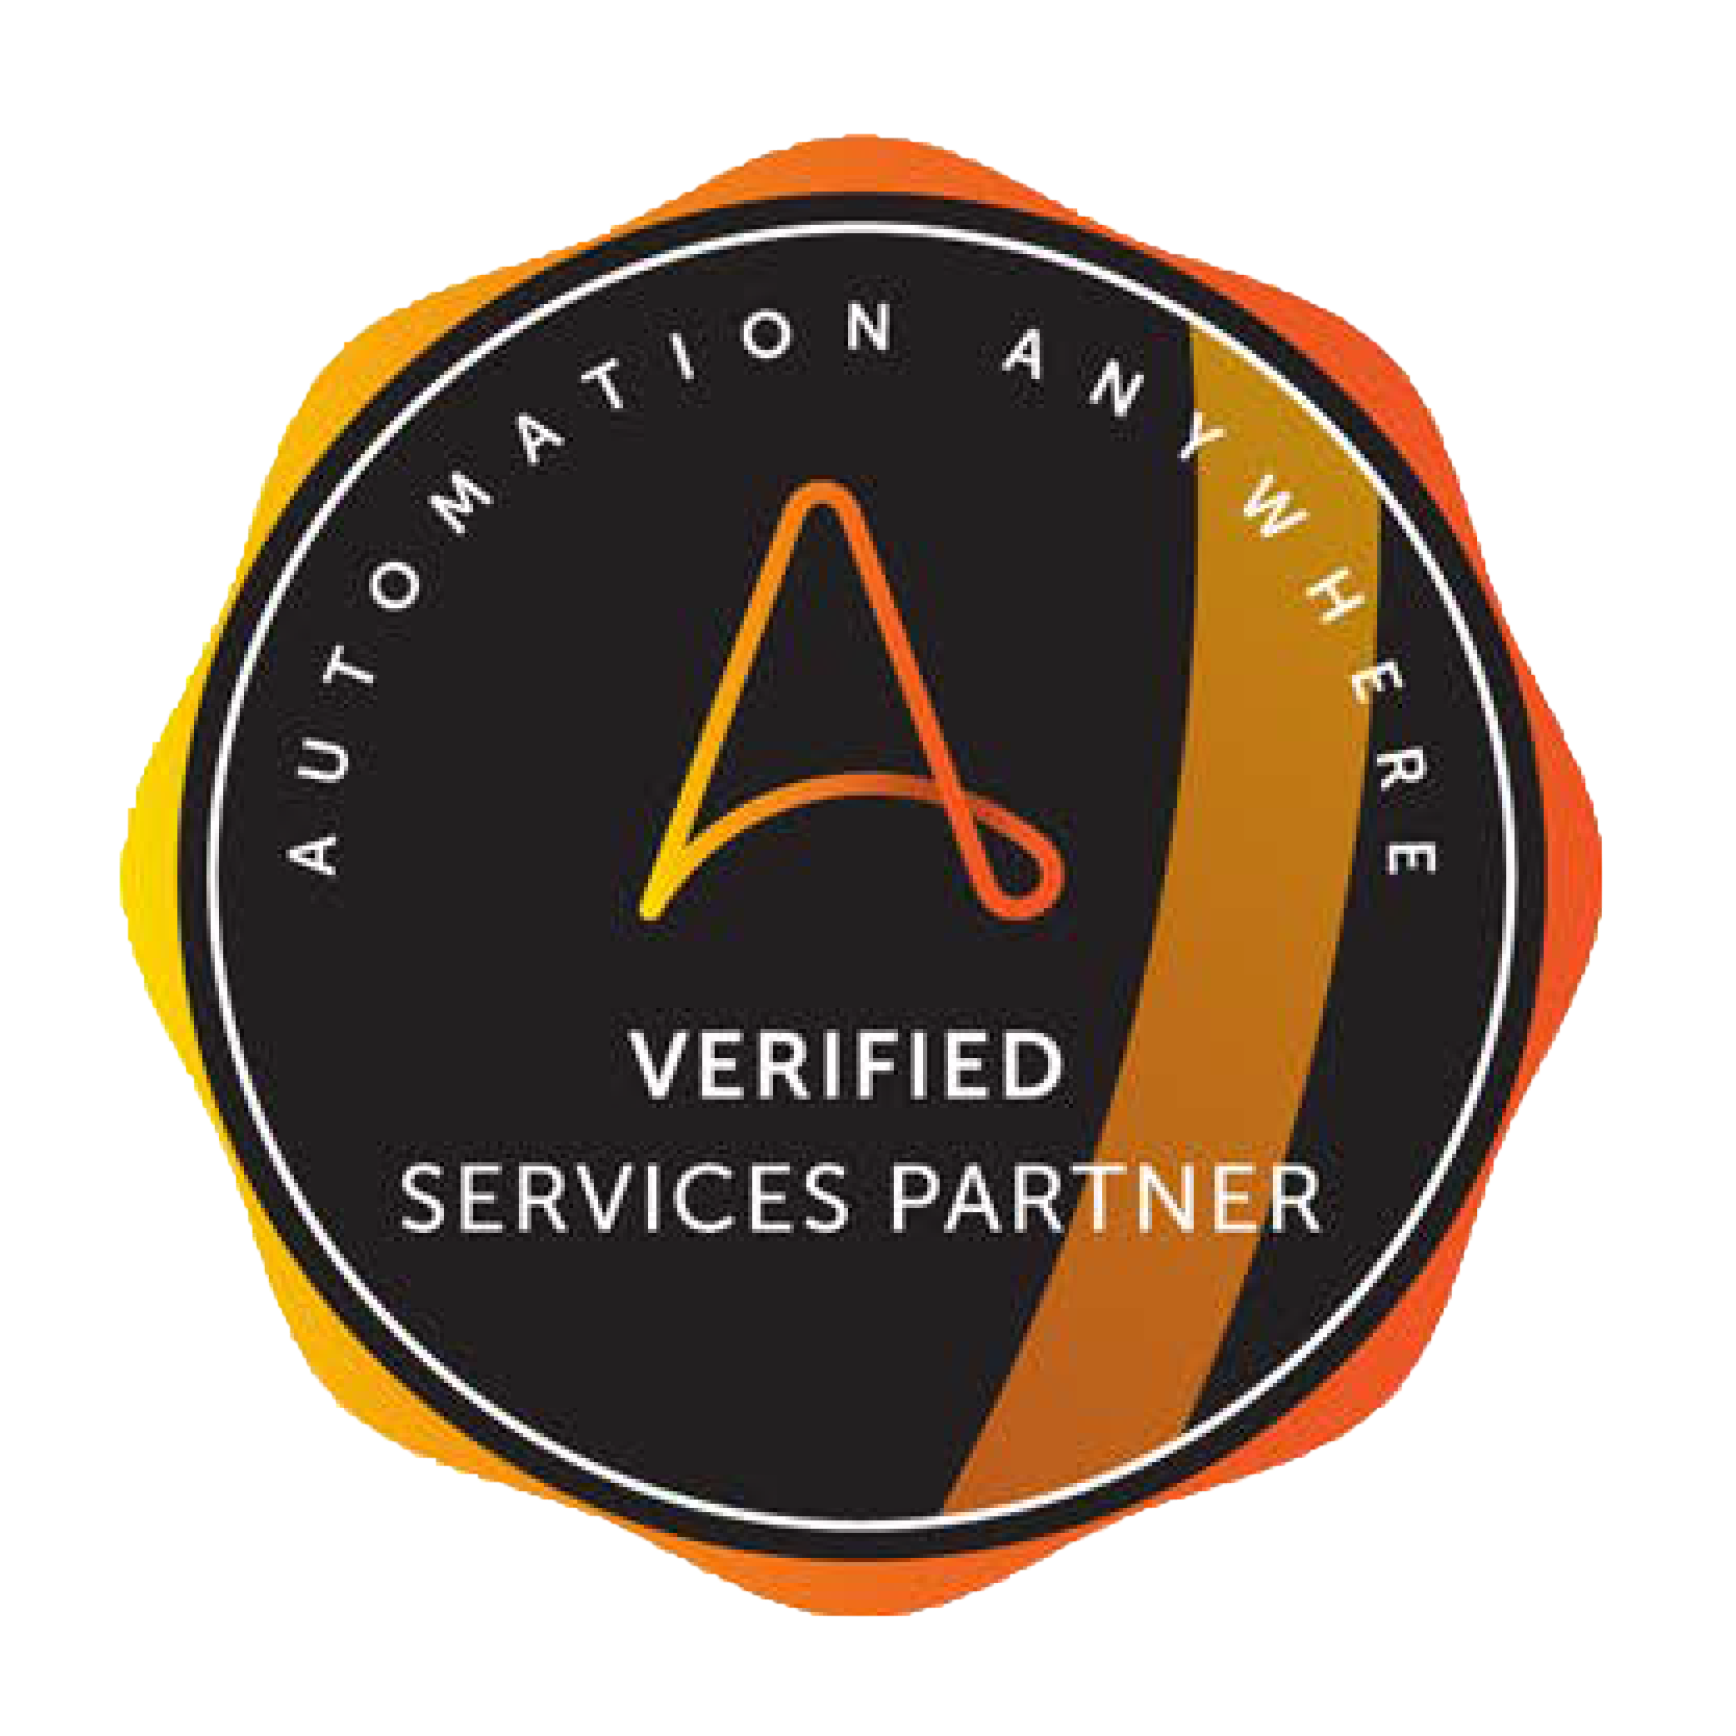 Tangentia | Automation Anywhere Recognizes Tangentia as a Verified Services Partner